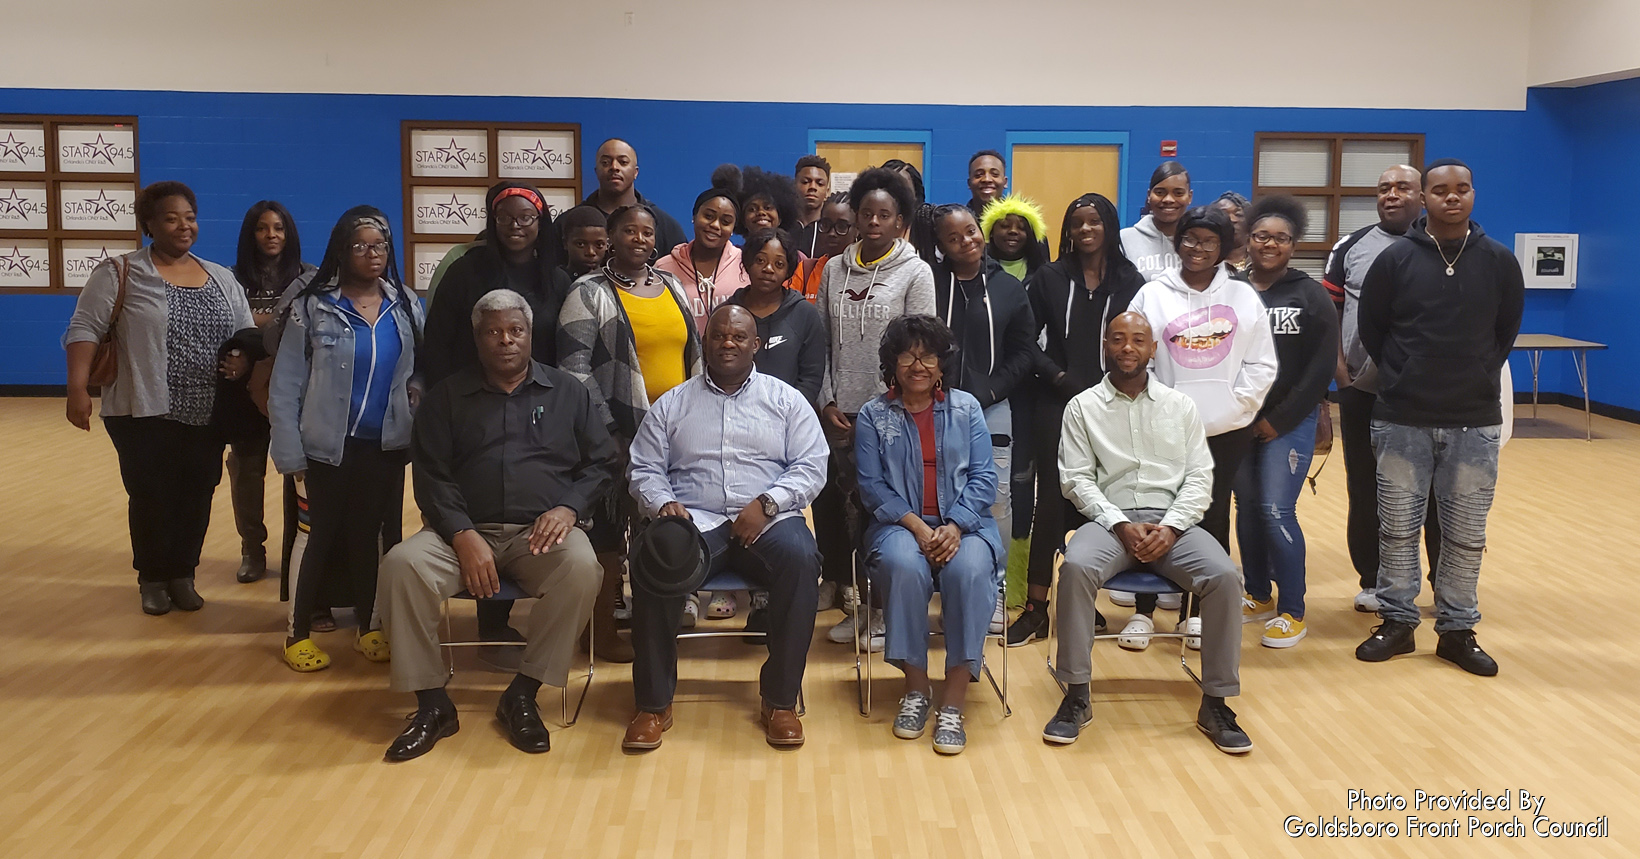 The members of the mentoring program attended the movie “Harriet” and hosted a conversation afterwards. The conversation held talked about the history of slavery and the impact it still has today on society.